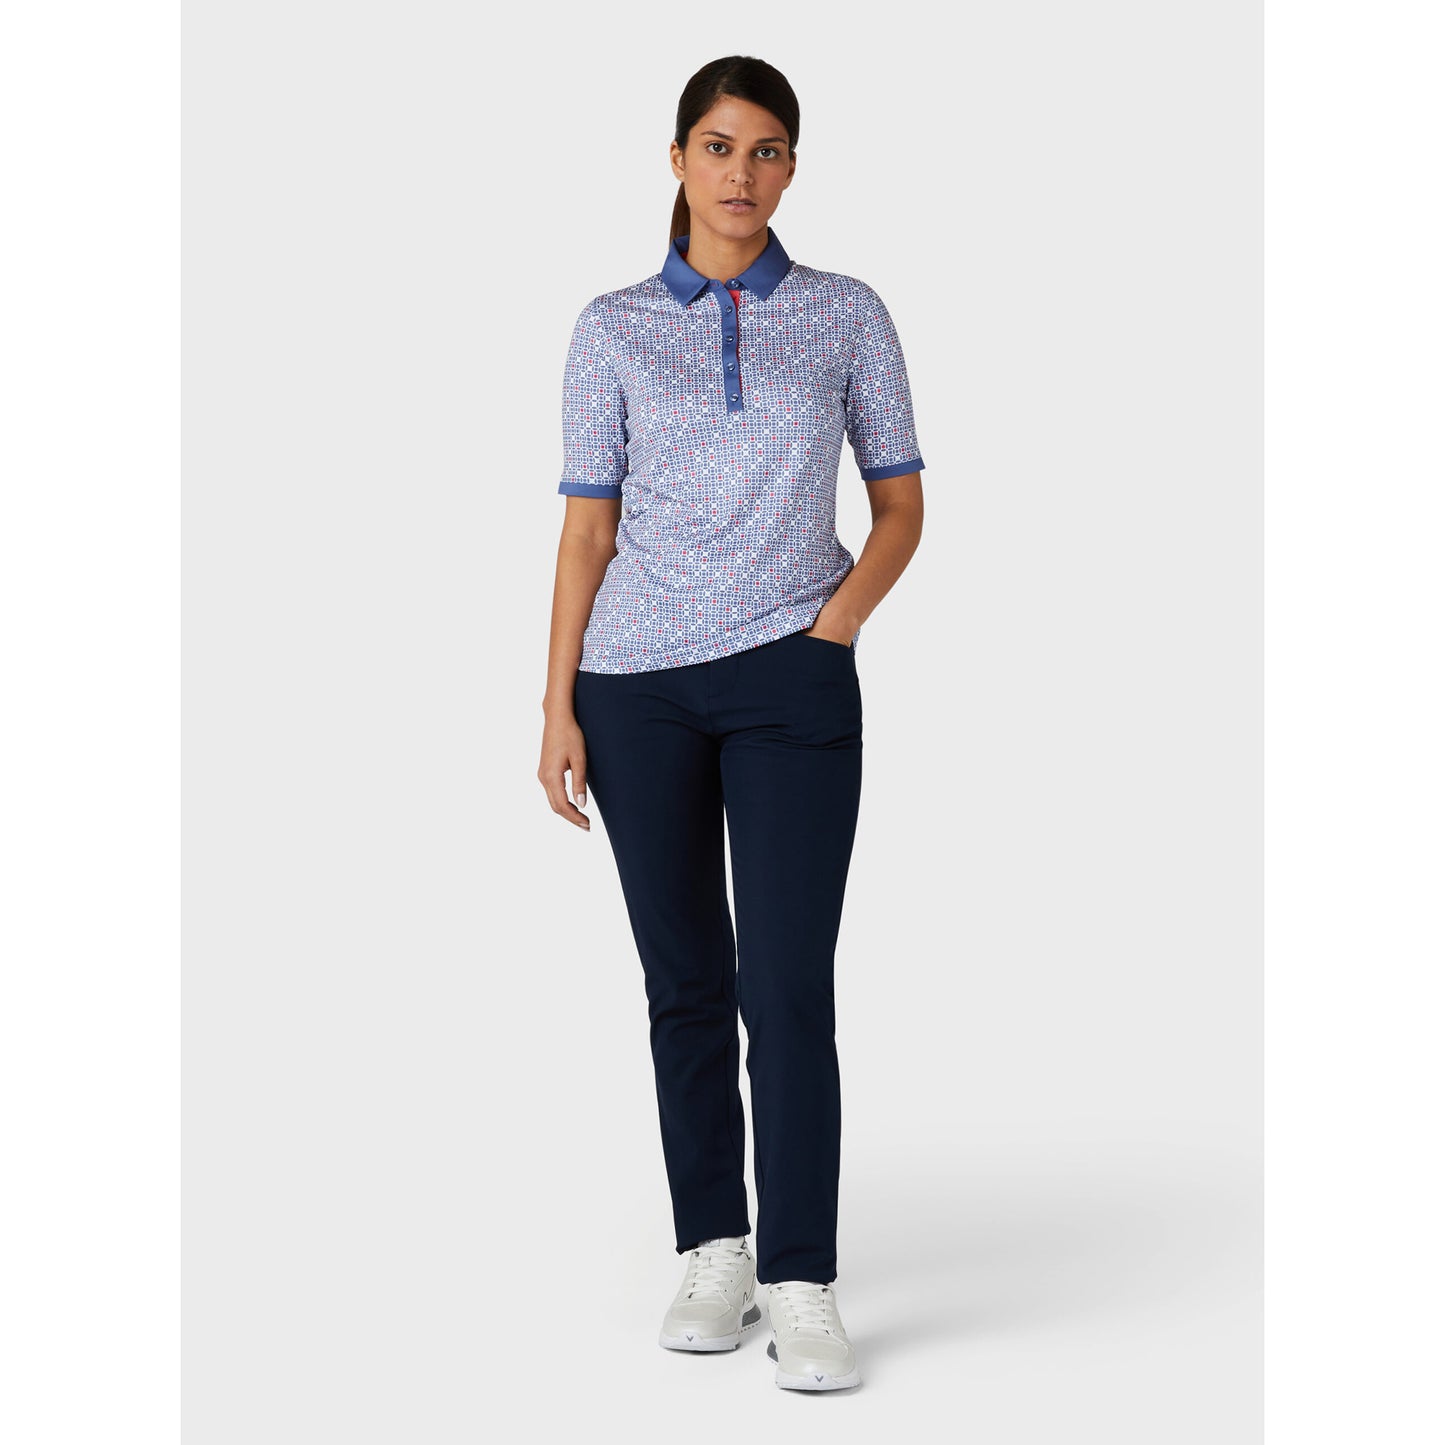 Callaway Ladies Short Sleeve Polo Shirt with Mesh Insert Detail in Coastal Fjord